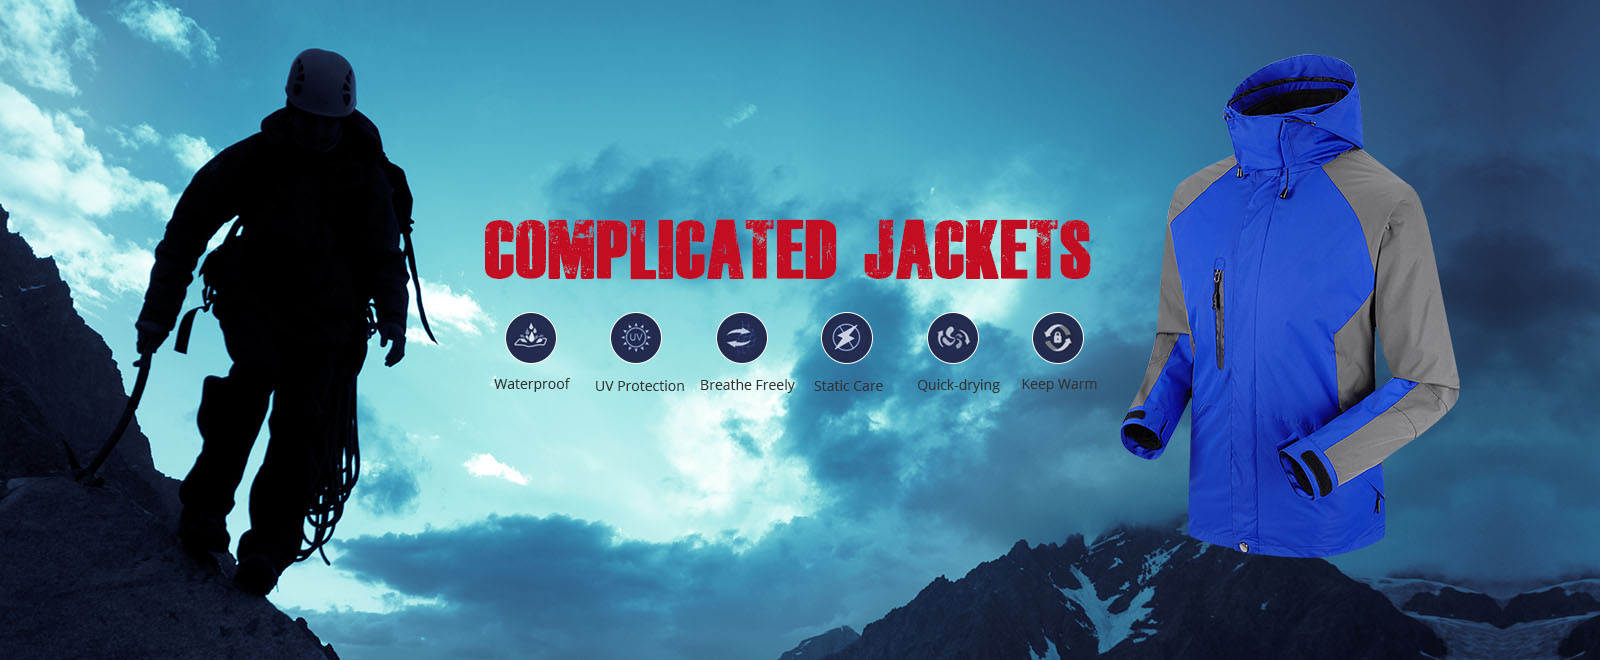 Complicated Jackets